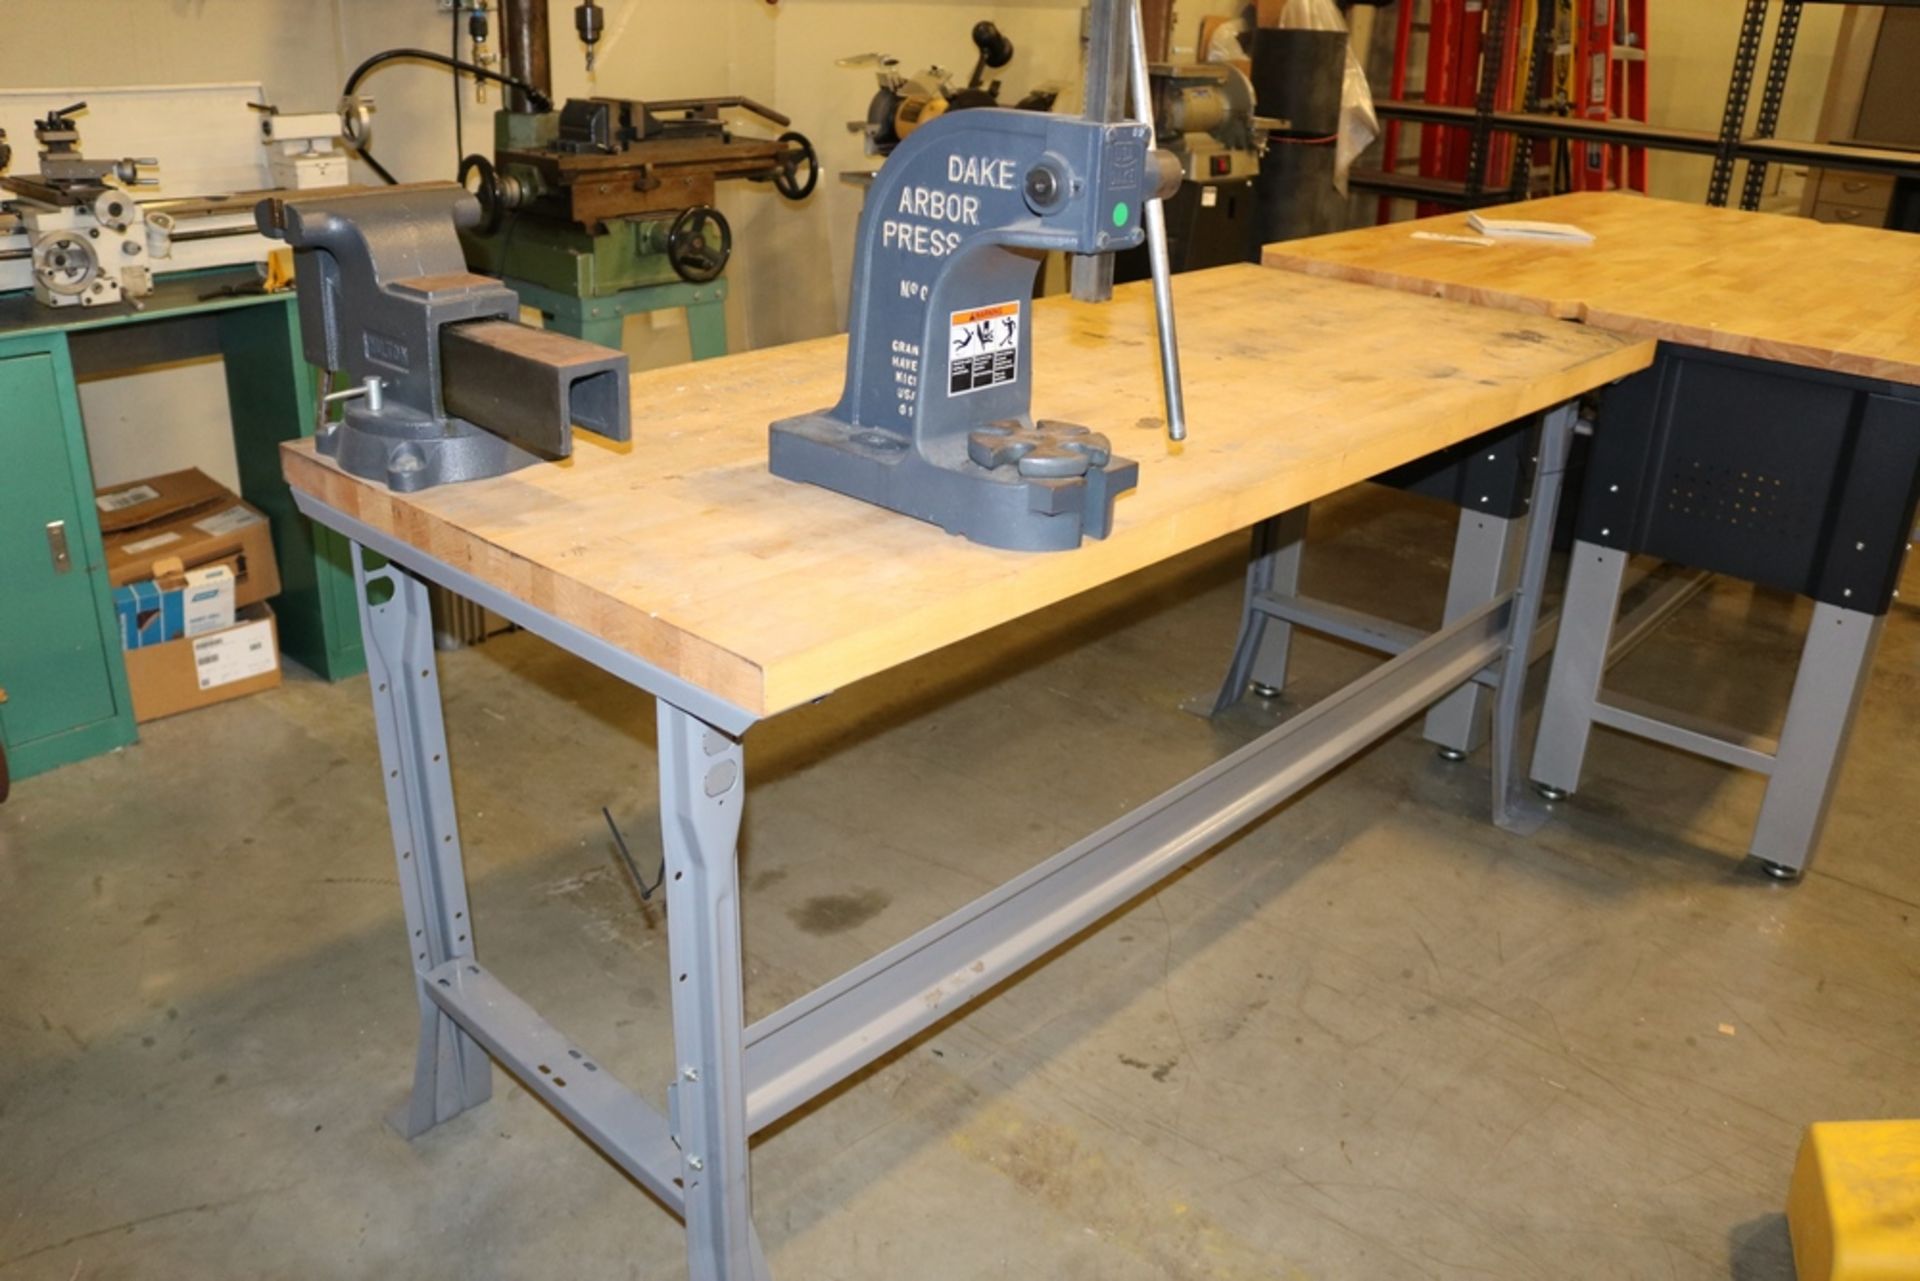 Wilton 8" Jaw Table Vice & Drake Abror Press No 0 With Wood Top Work Table 6' x 30" x 33 1/2"